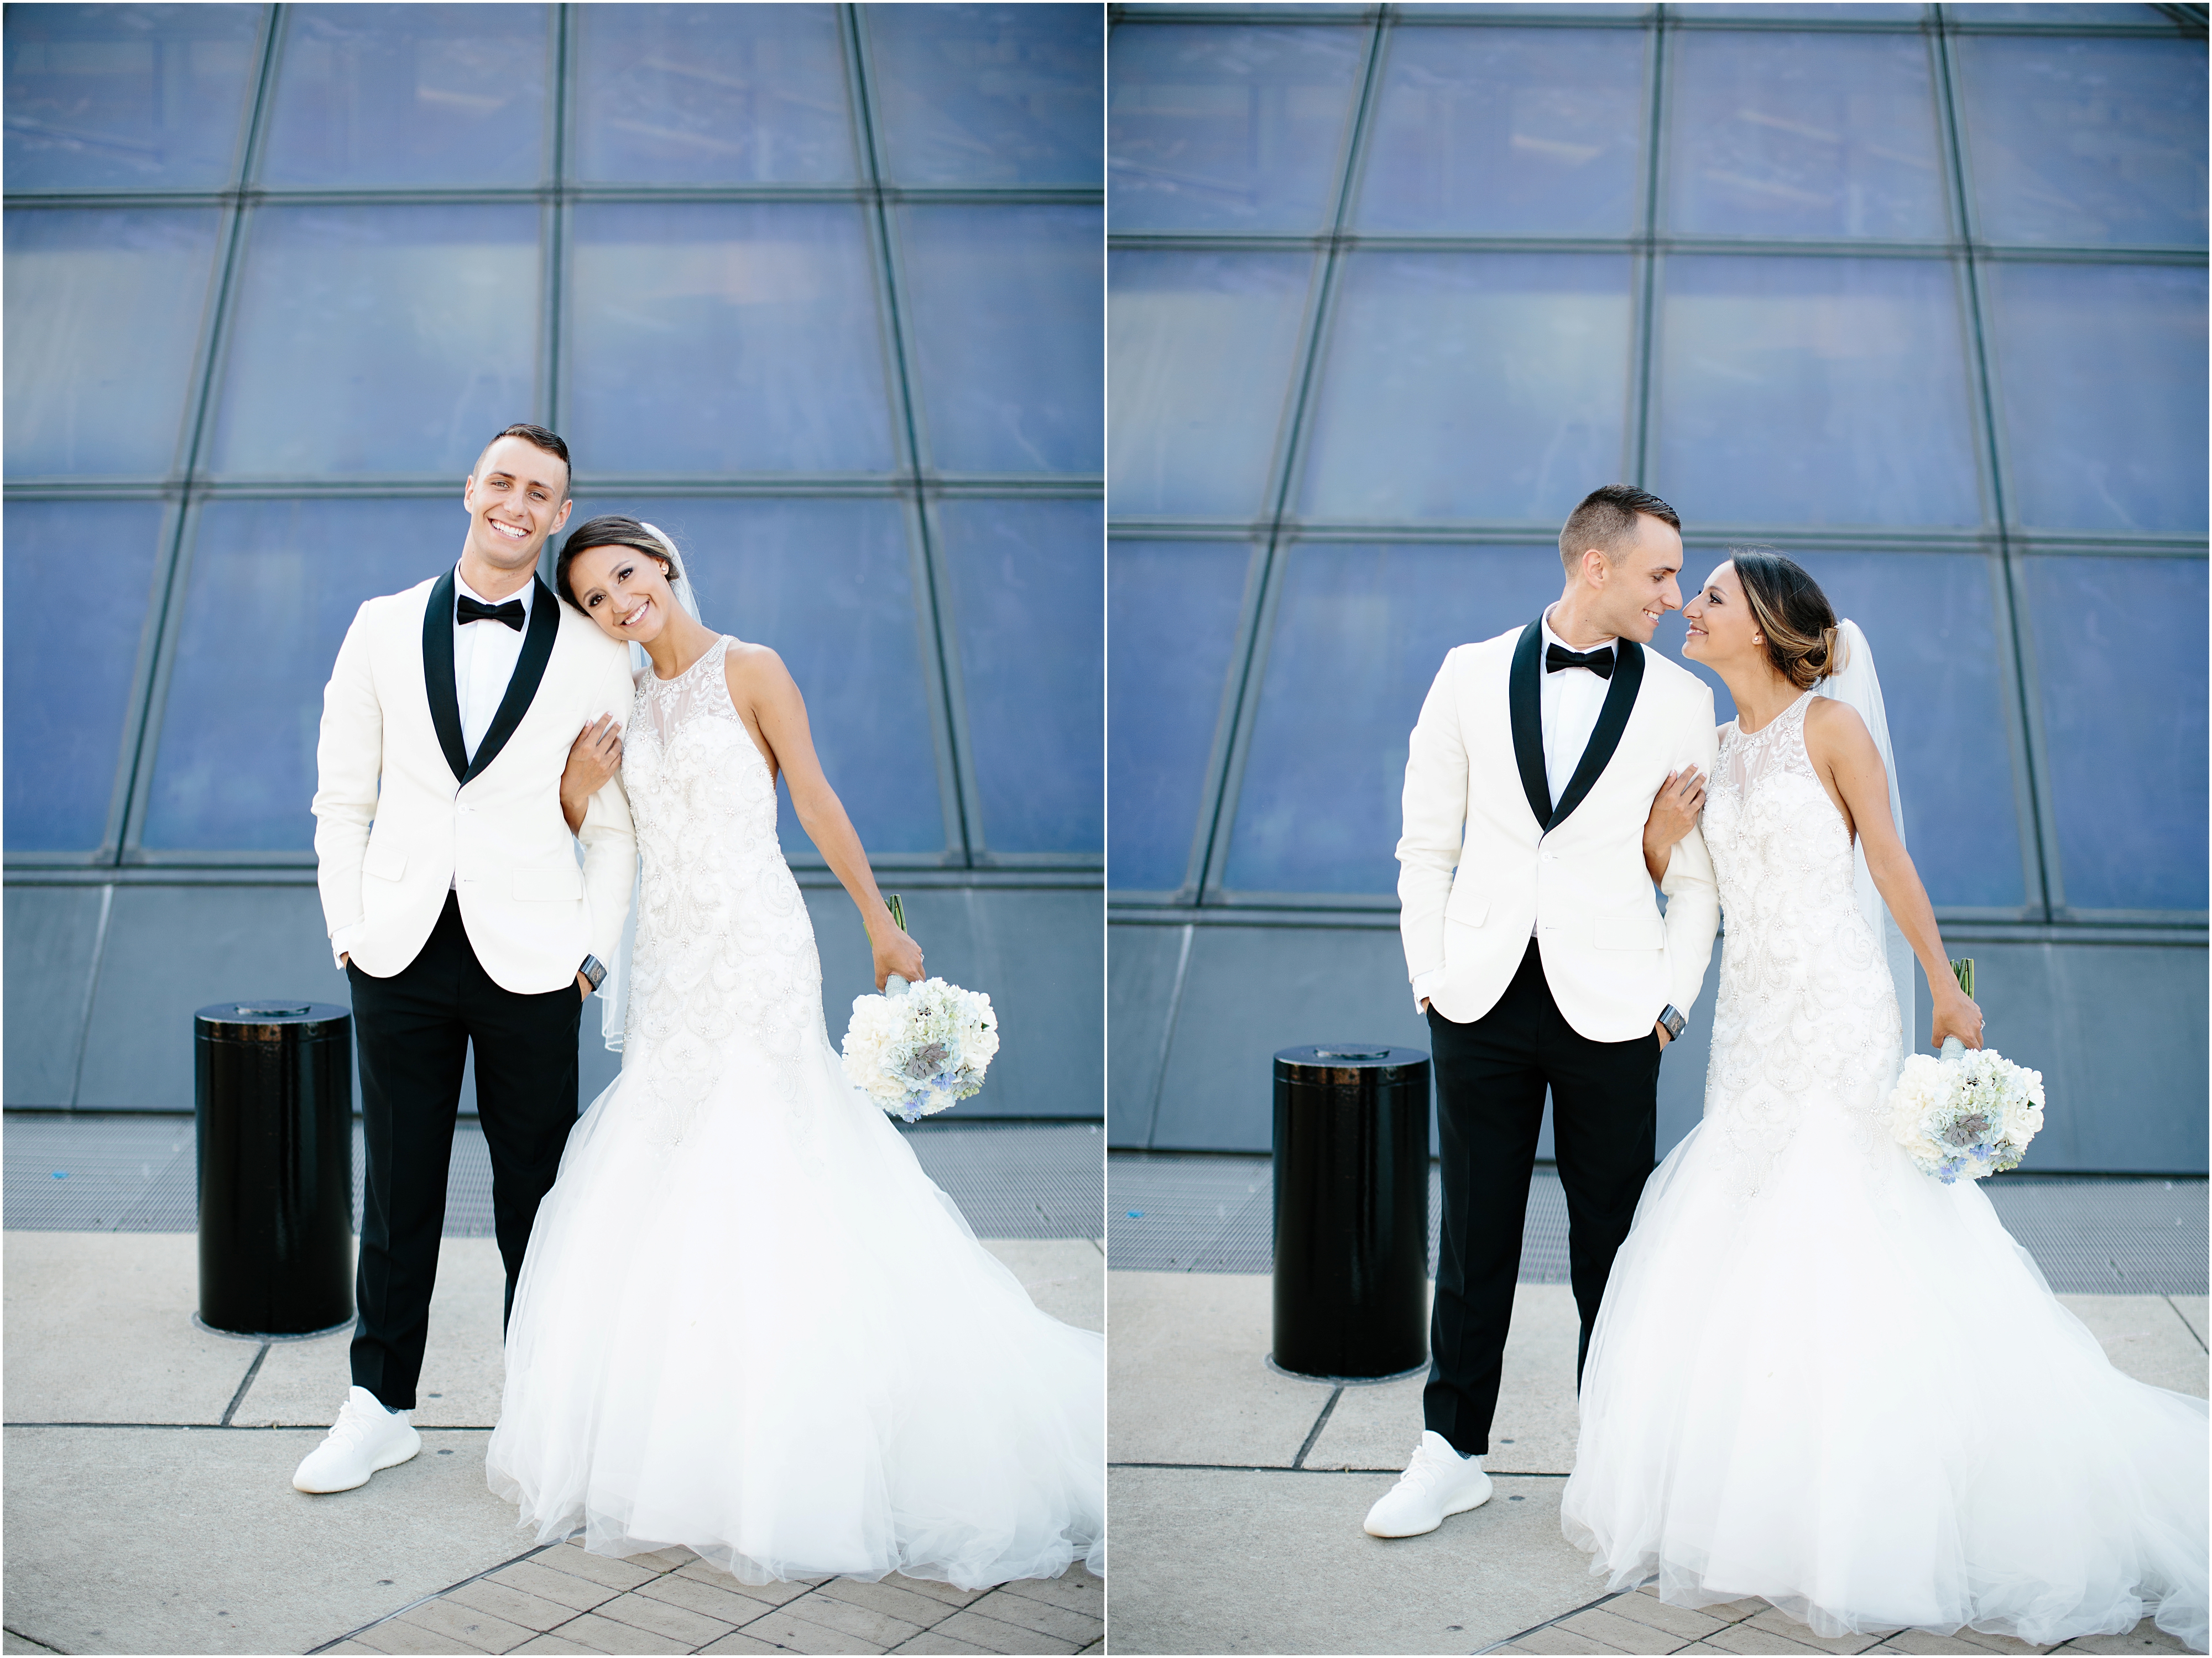 Nautical wedding in front of Cleveland Rock Hall of Fame